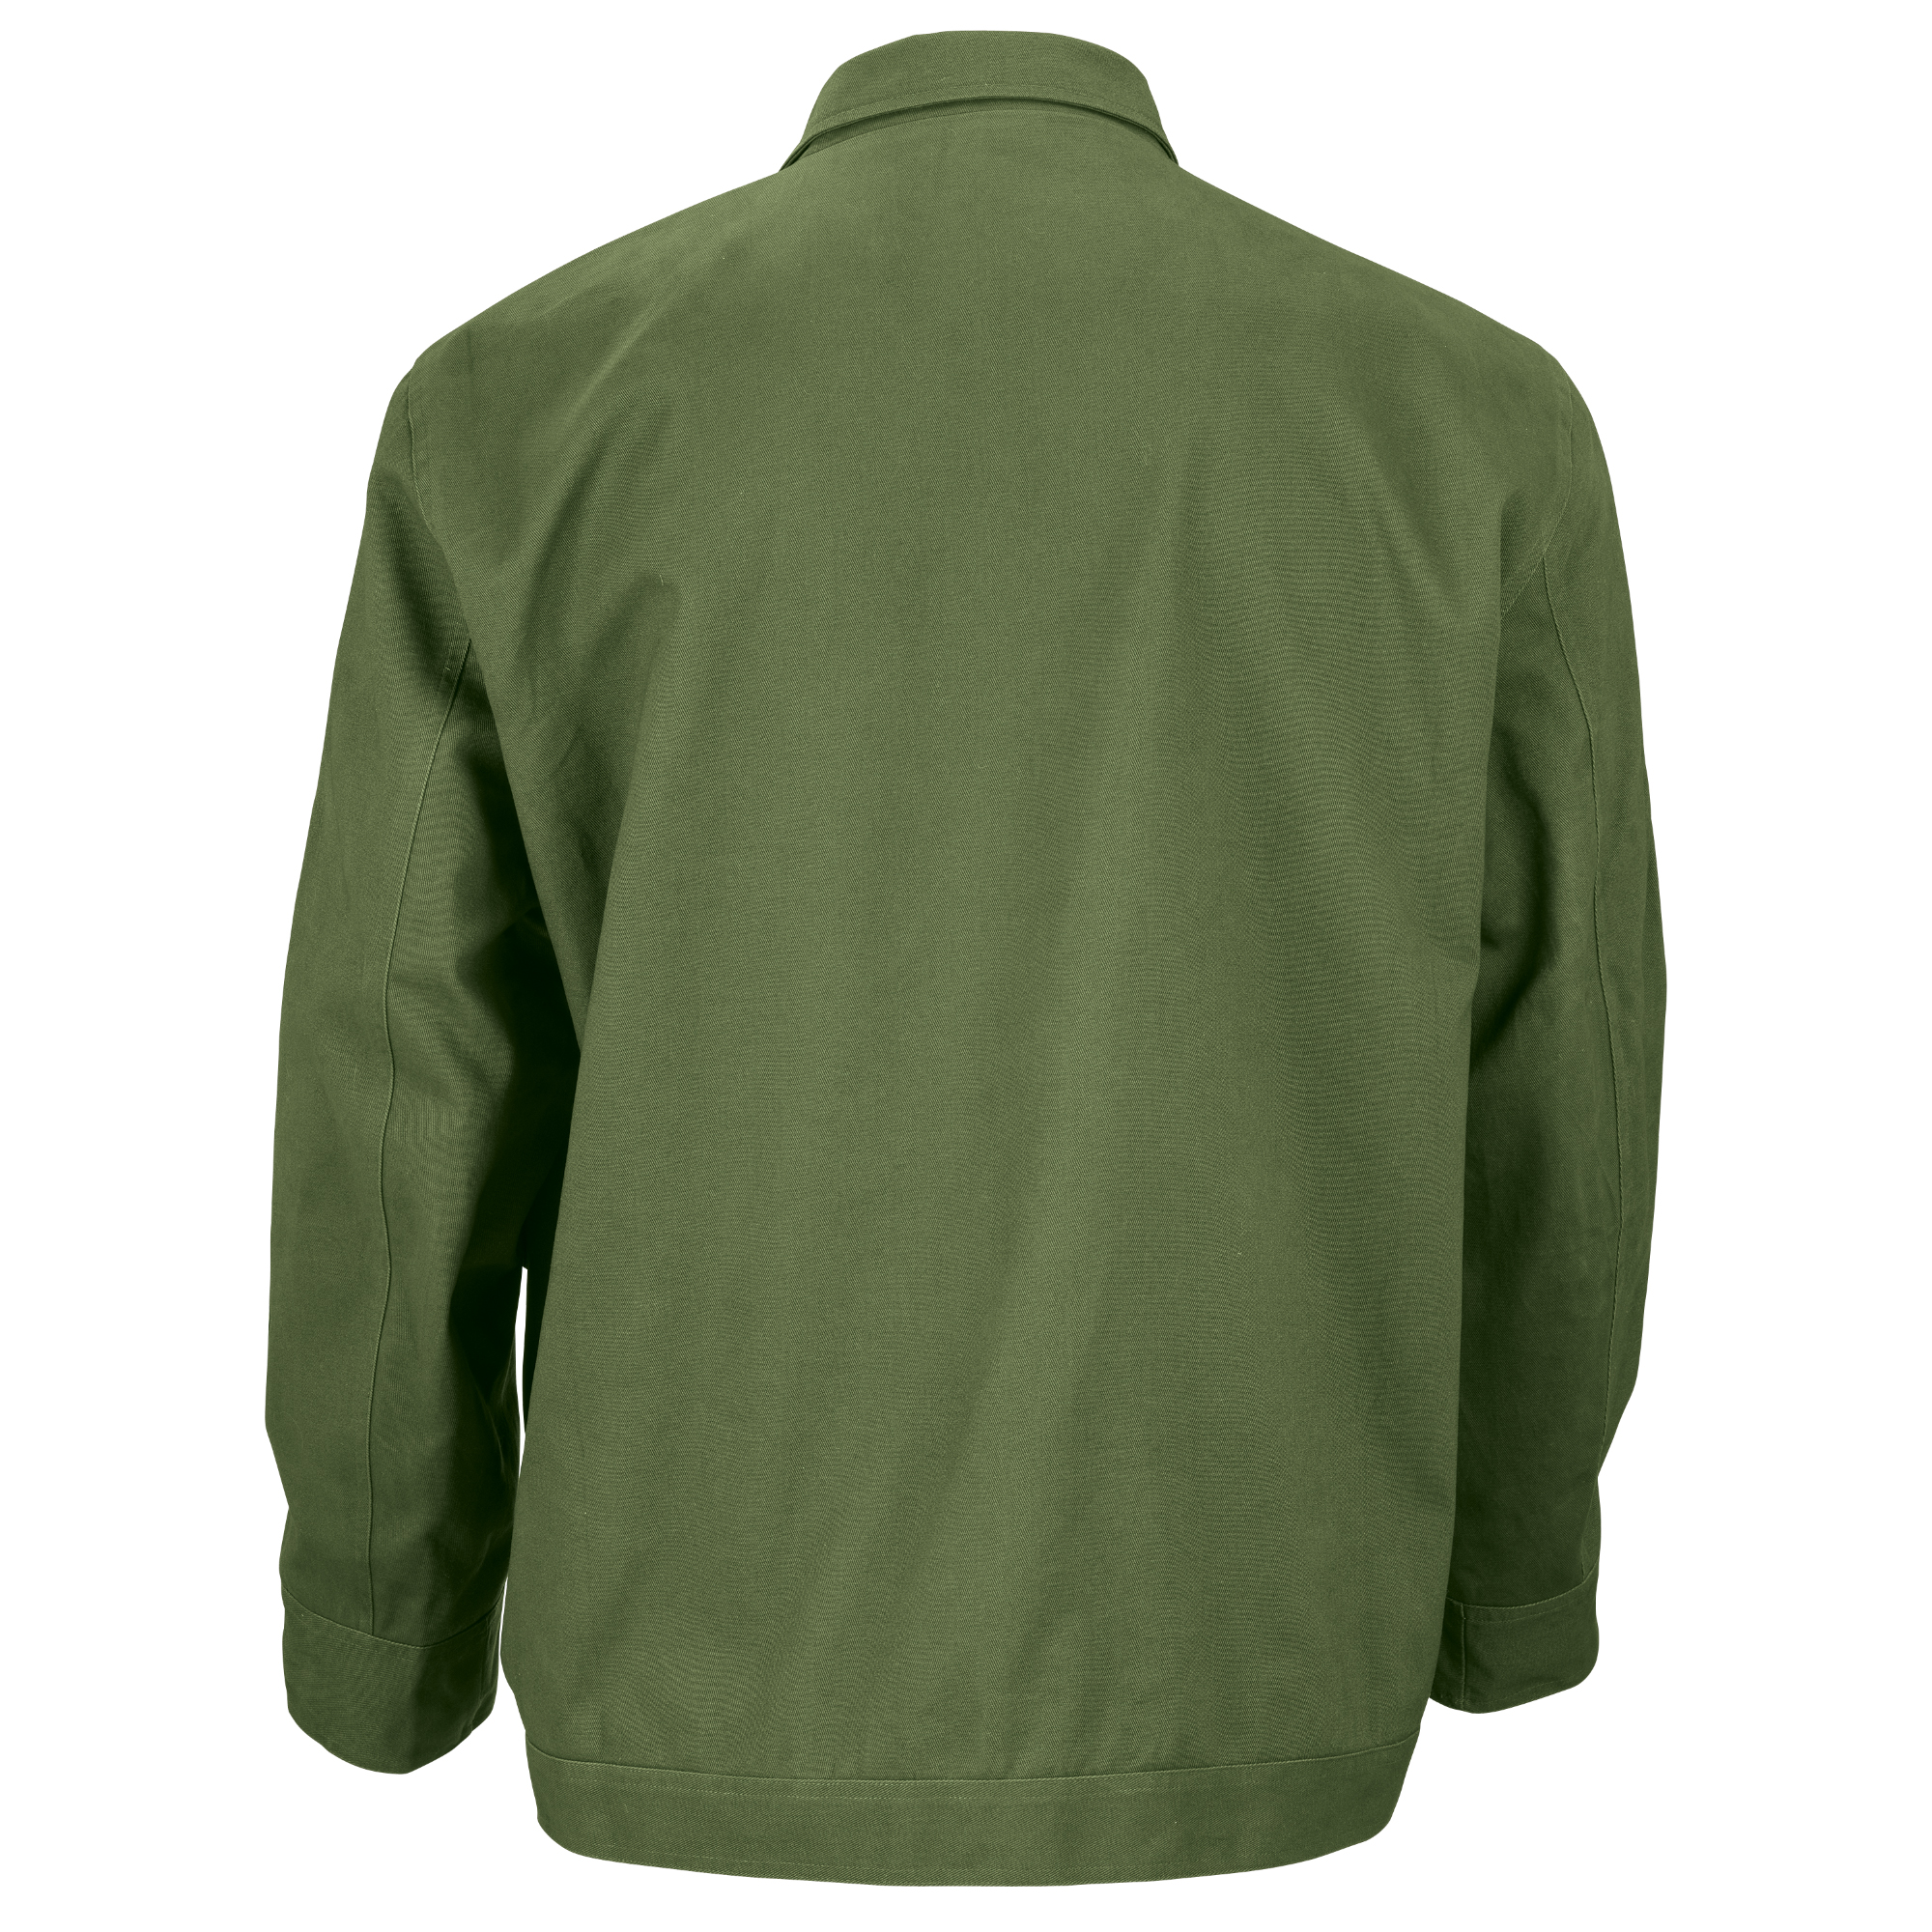 Personalized US Army Field Jacket 10539 0017 a main